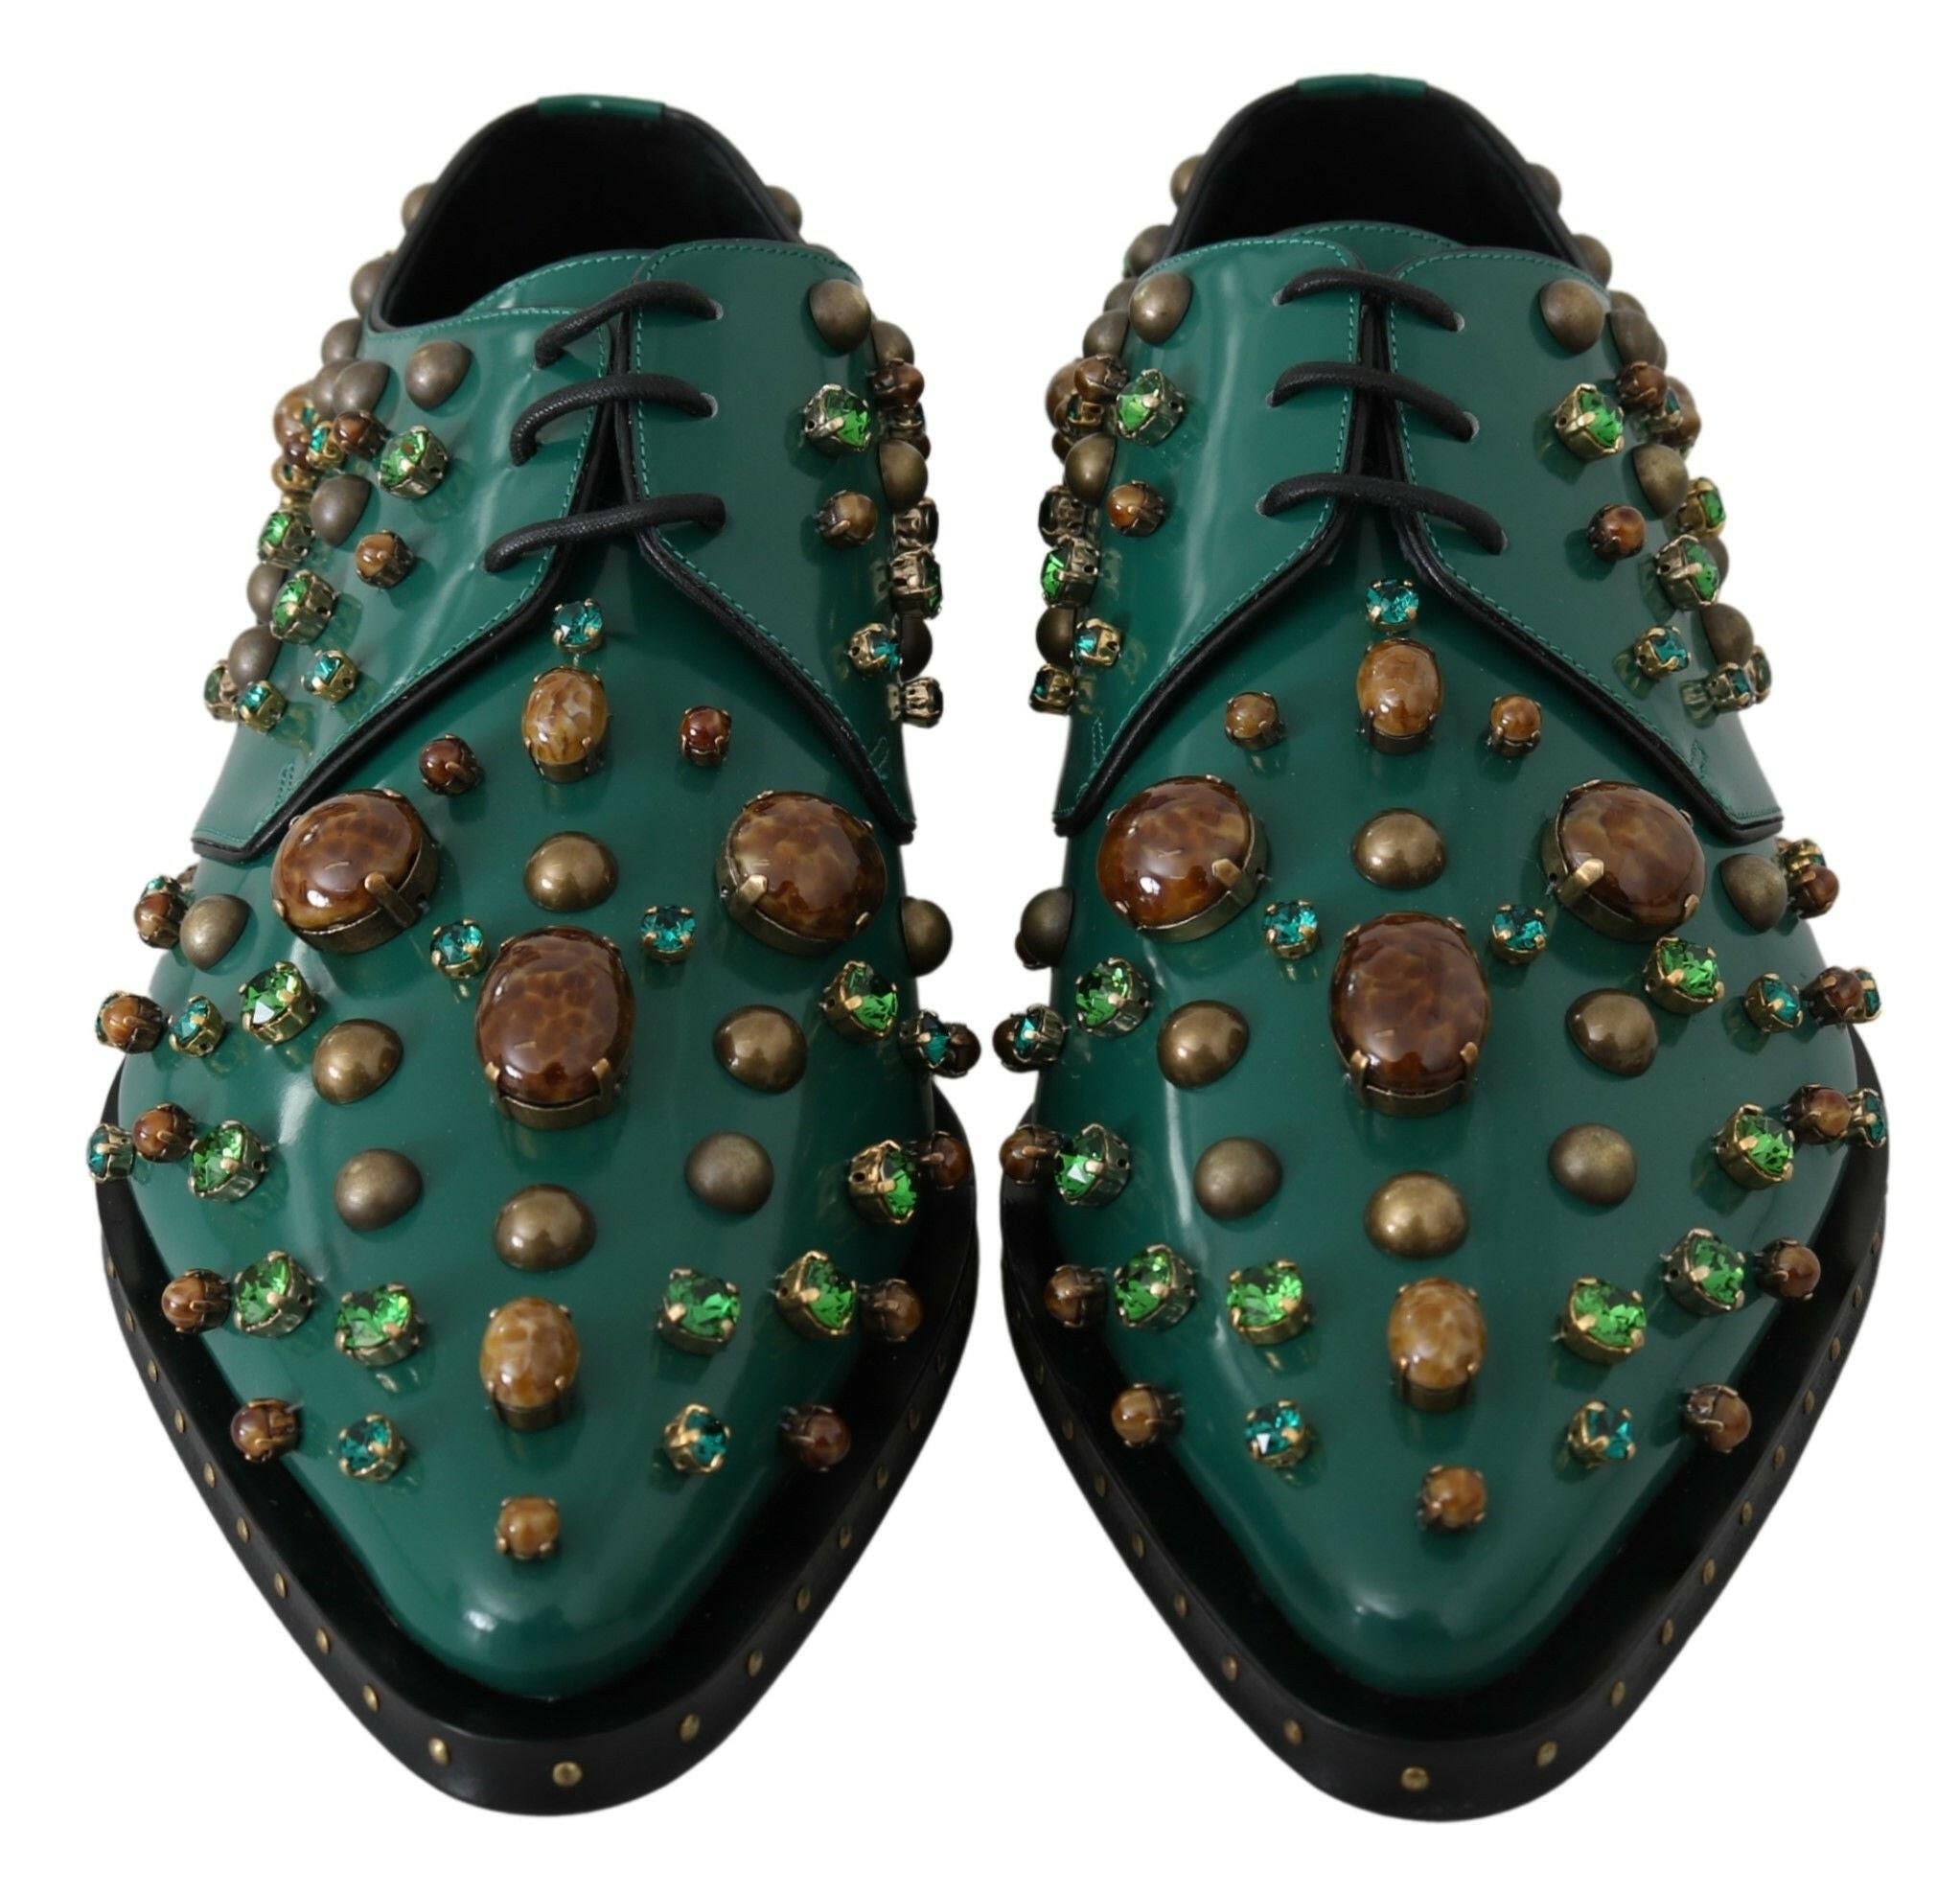 Dolce & Gabbana Green Leather Crystal Dress Broque Shoes - GENUINE AUTHENTIC BRAND LLC  